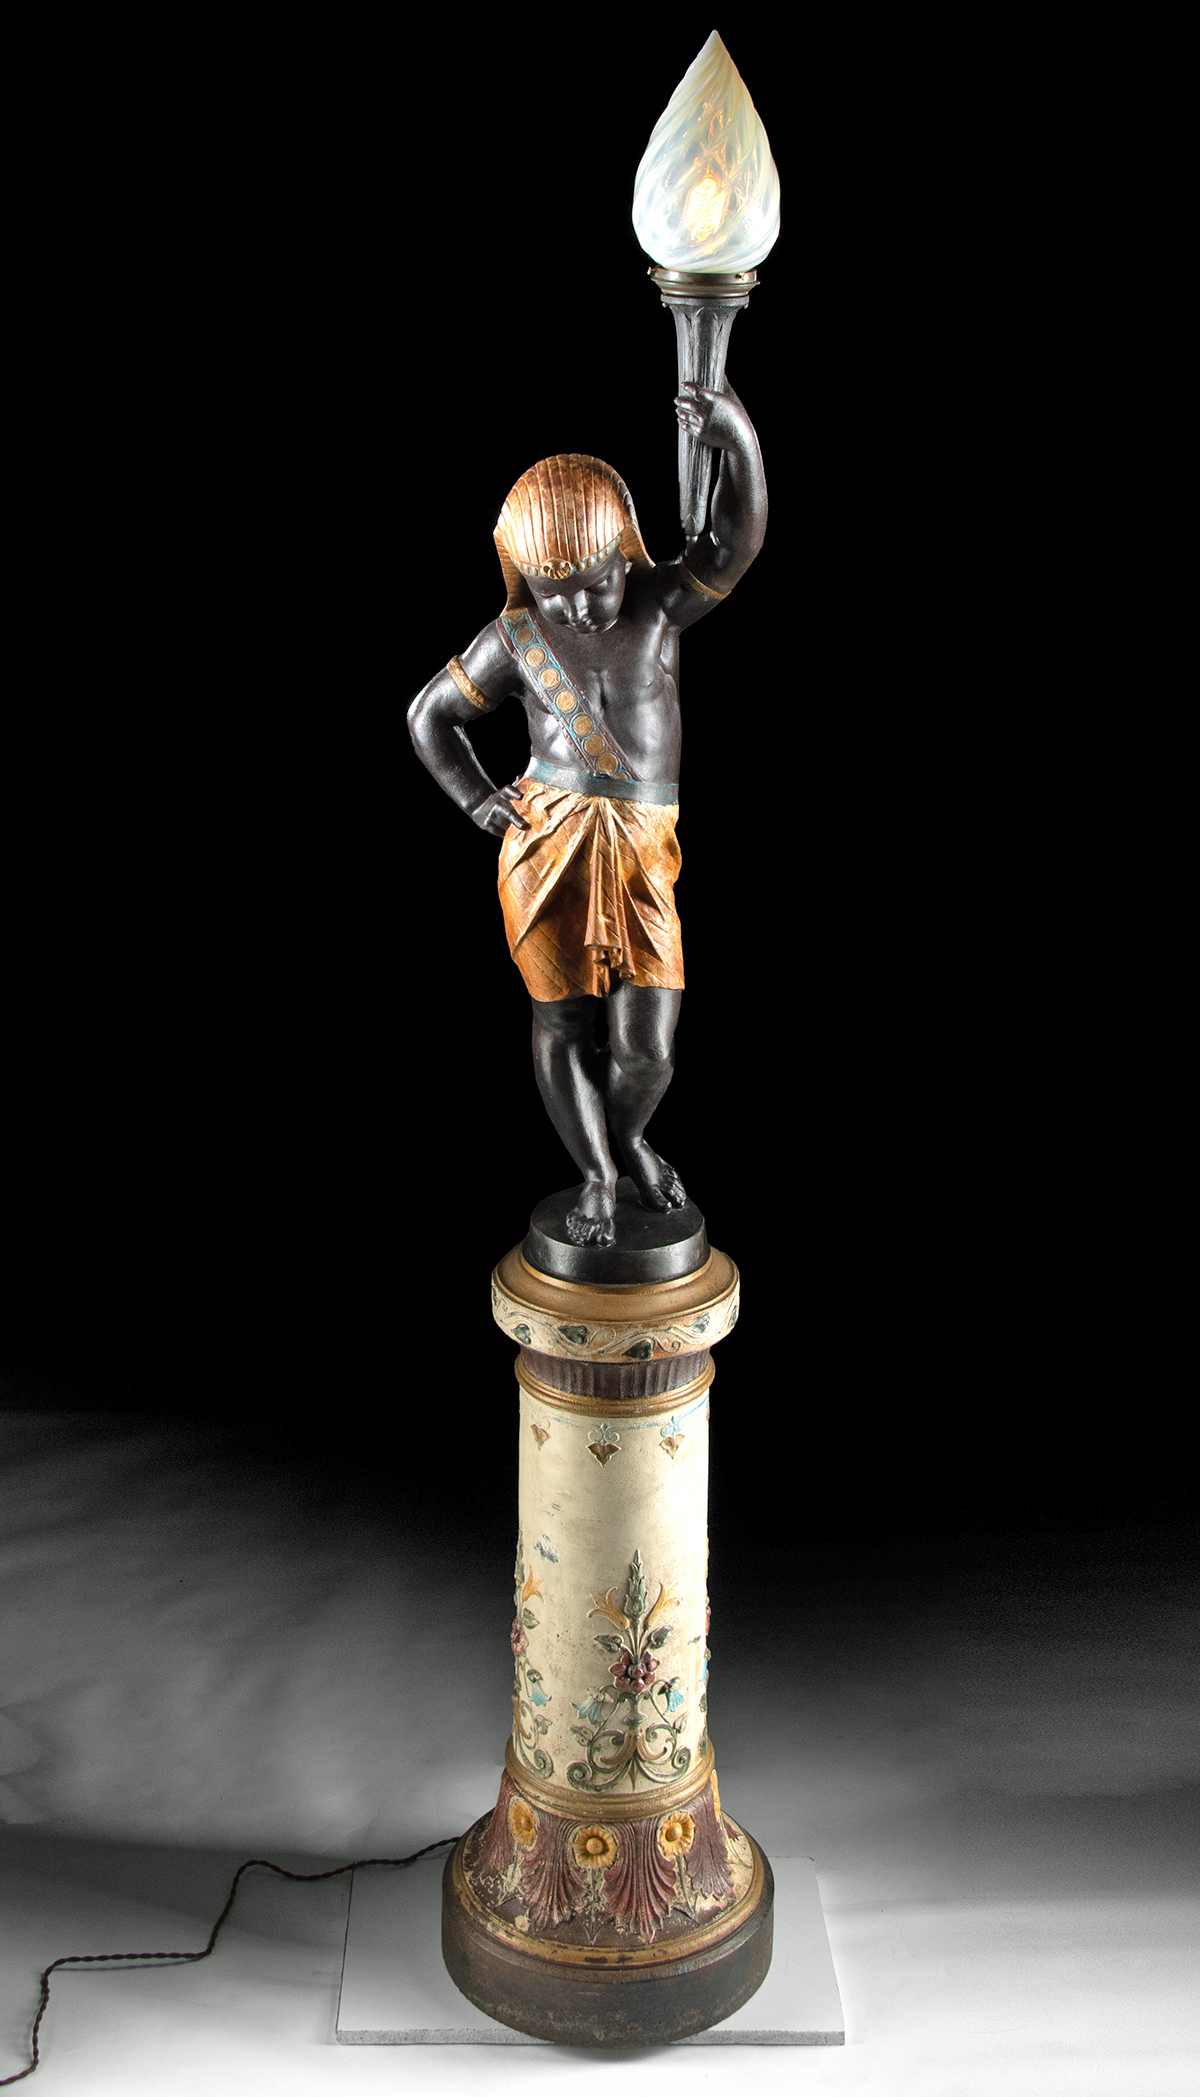 Lot 259, Auction 8/25/2022: 19th C. French Iron Torchiere of Egyptian Boy  on Column